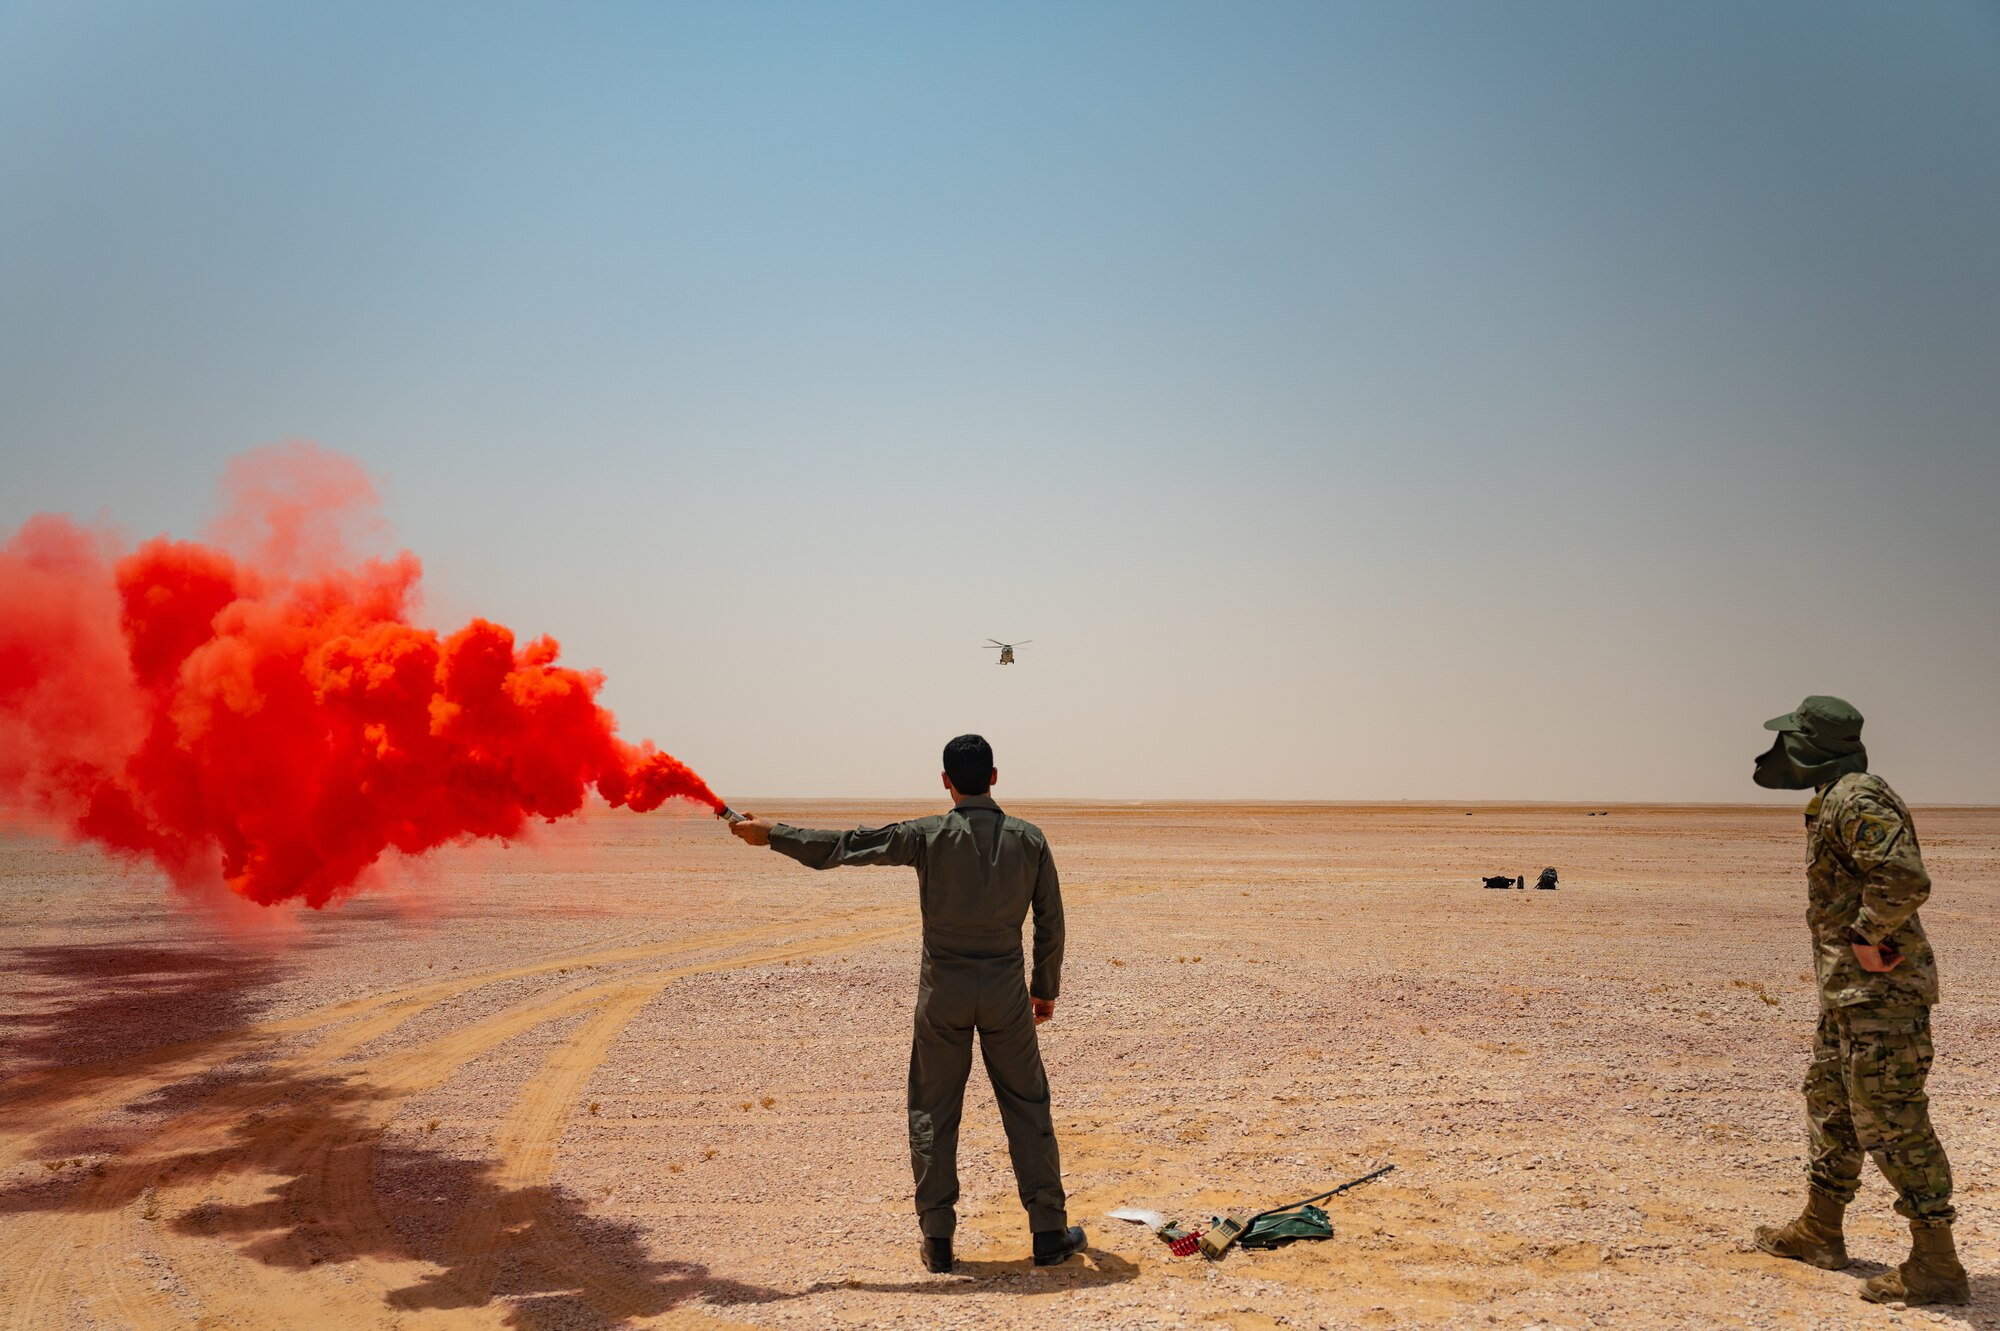 A Royal Air Force of Oman pilot, center, uses a smoke flare to indicate his position of retrieval to a rescue helicopter with U.S. Air Force Tech. Sgt. David Jones, right, a survival evasion resistance and escape instructor from U.S. Air Forces Central A3 Operations, while performing a survival training scenario in the Oman desert during Accurate Test 22, May 17, 2022. This joint force training helped streamline processes and provided both forces a better understanding of mutually beneficial combat search and rescue operations. (U.S. Air Force photo by Staff Sgt. Dana Tourtellotte)